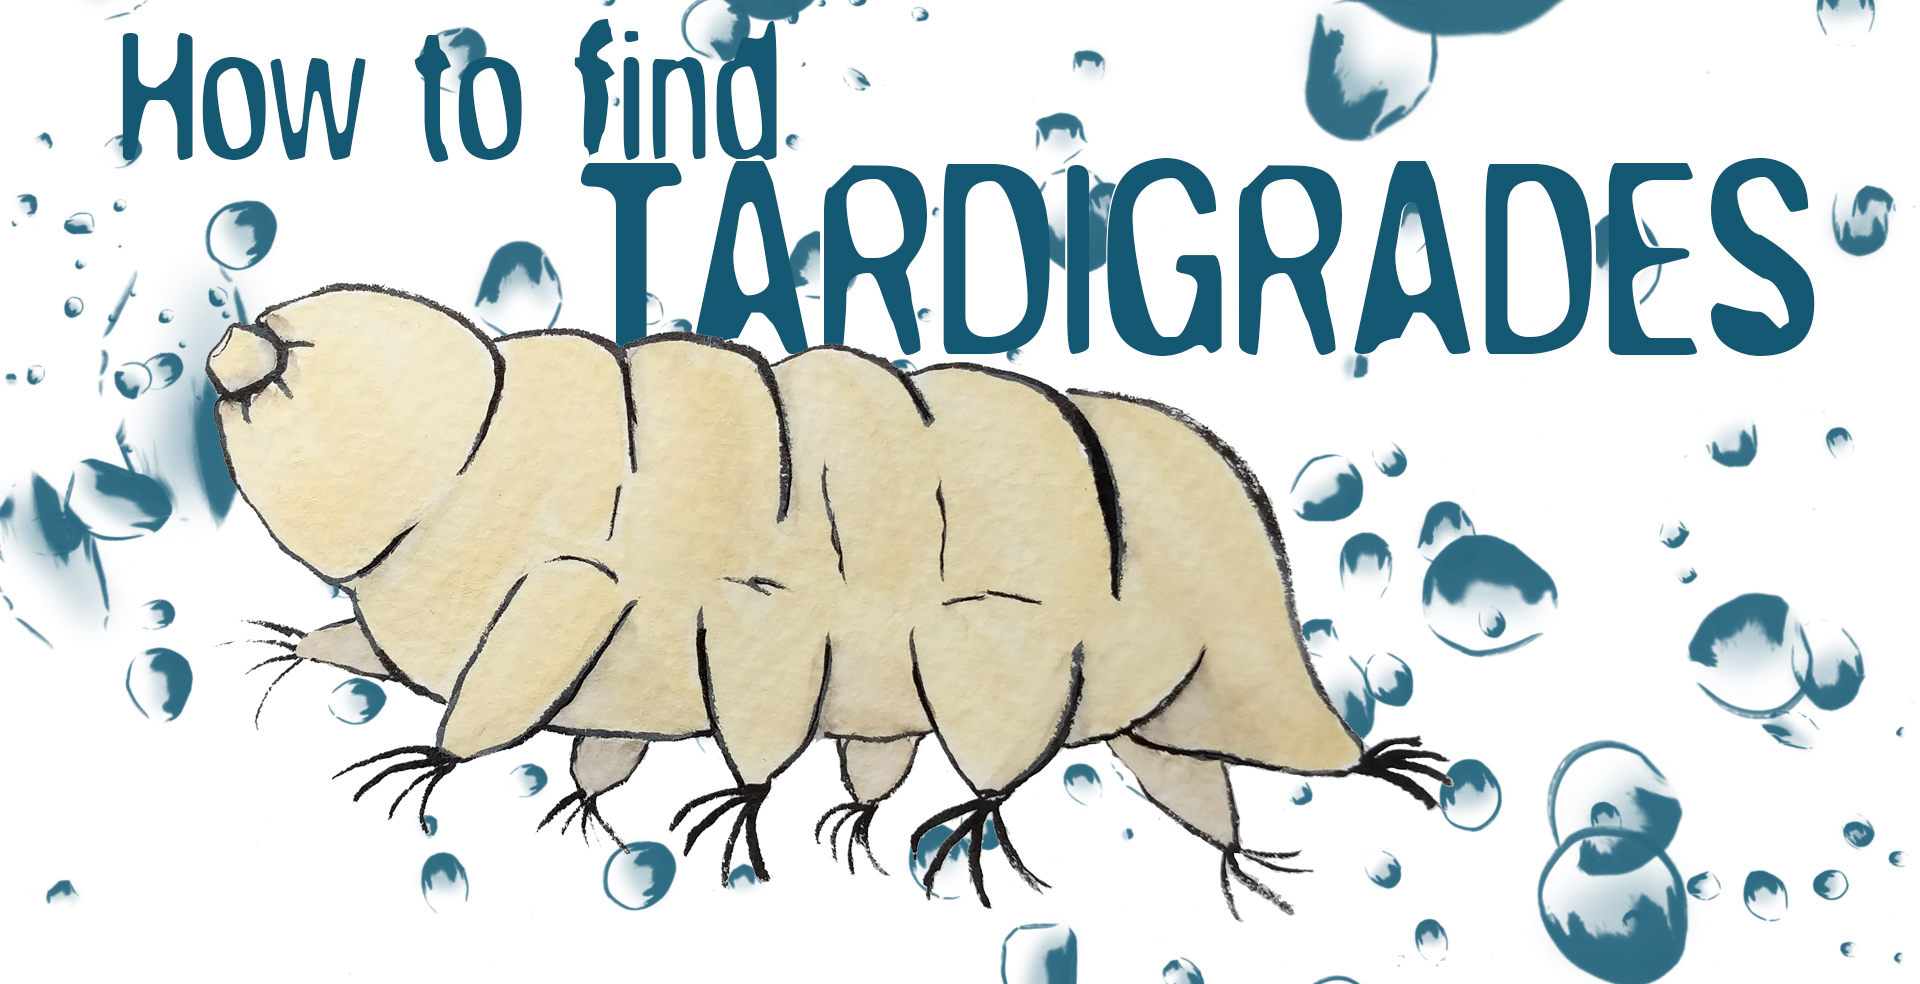 How to Find Tardigrades